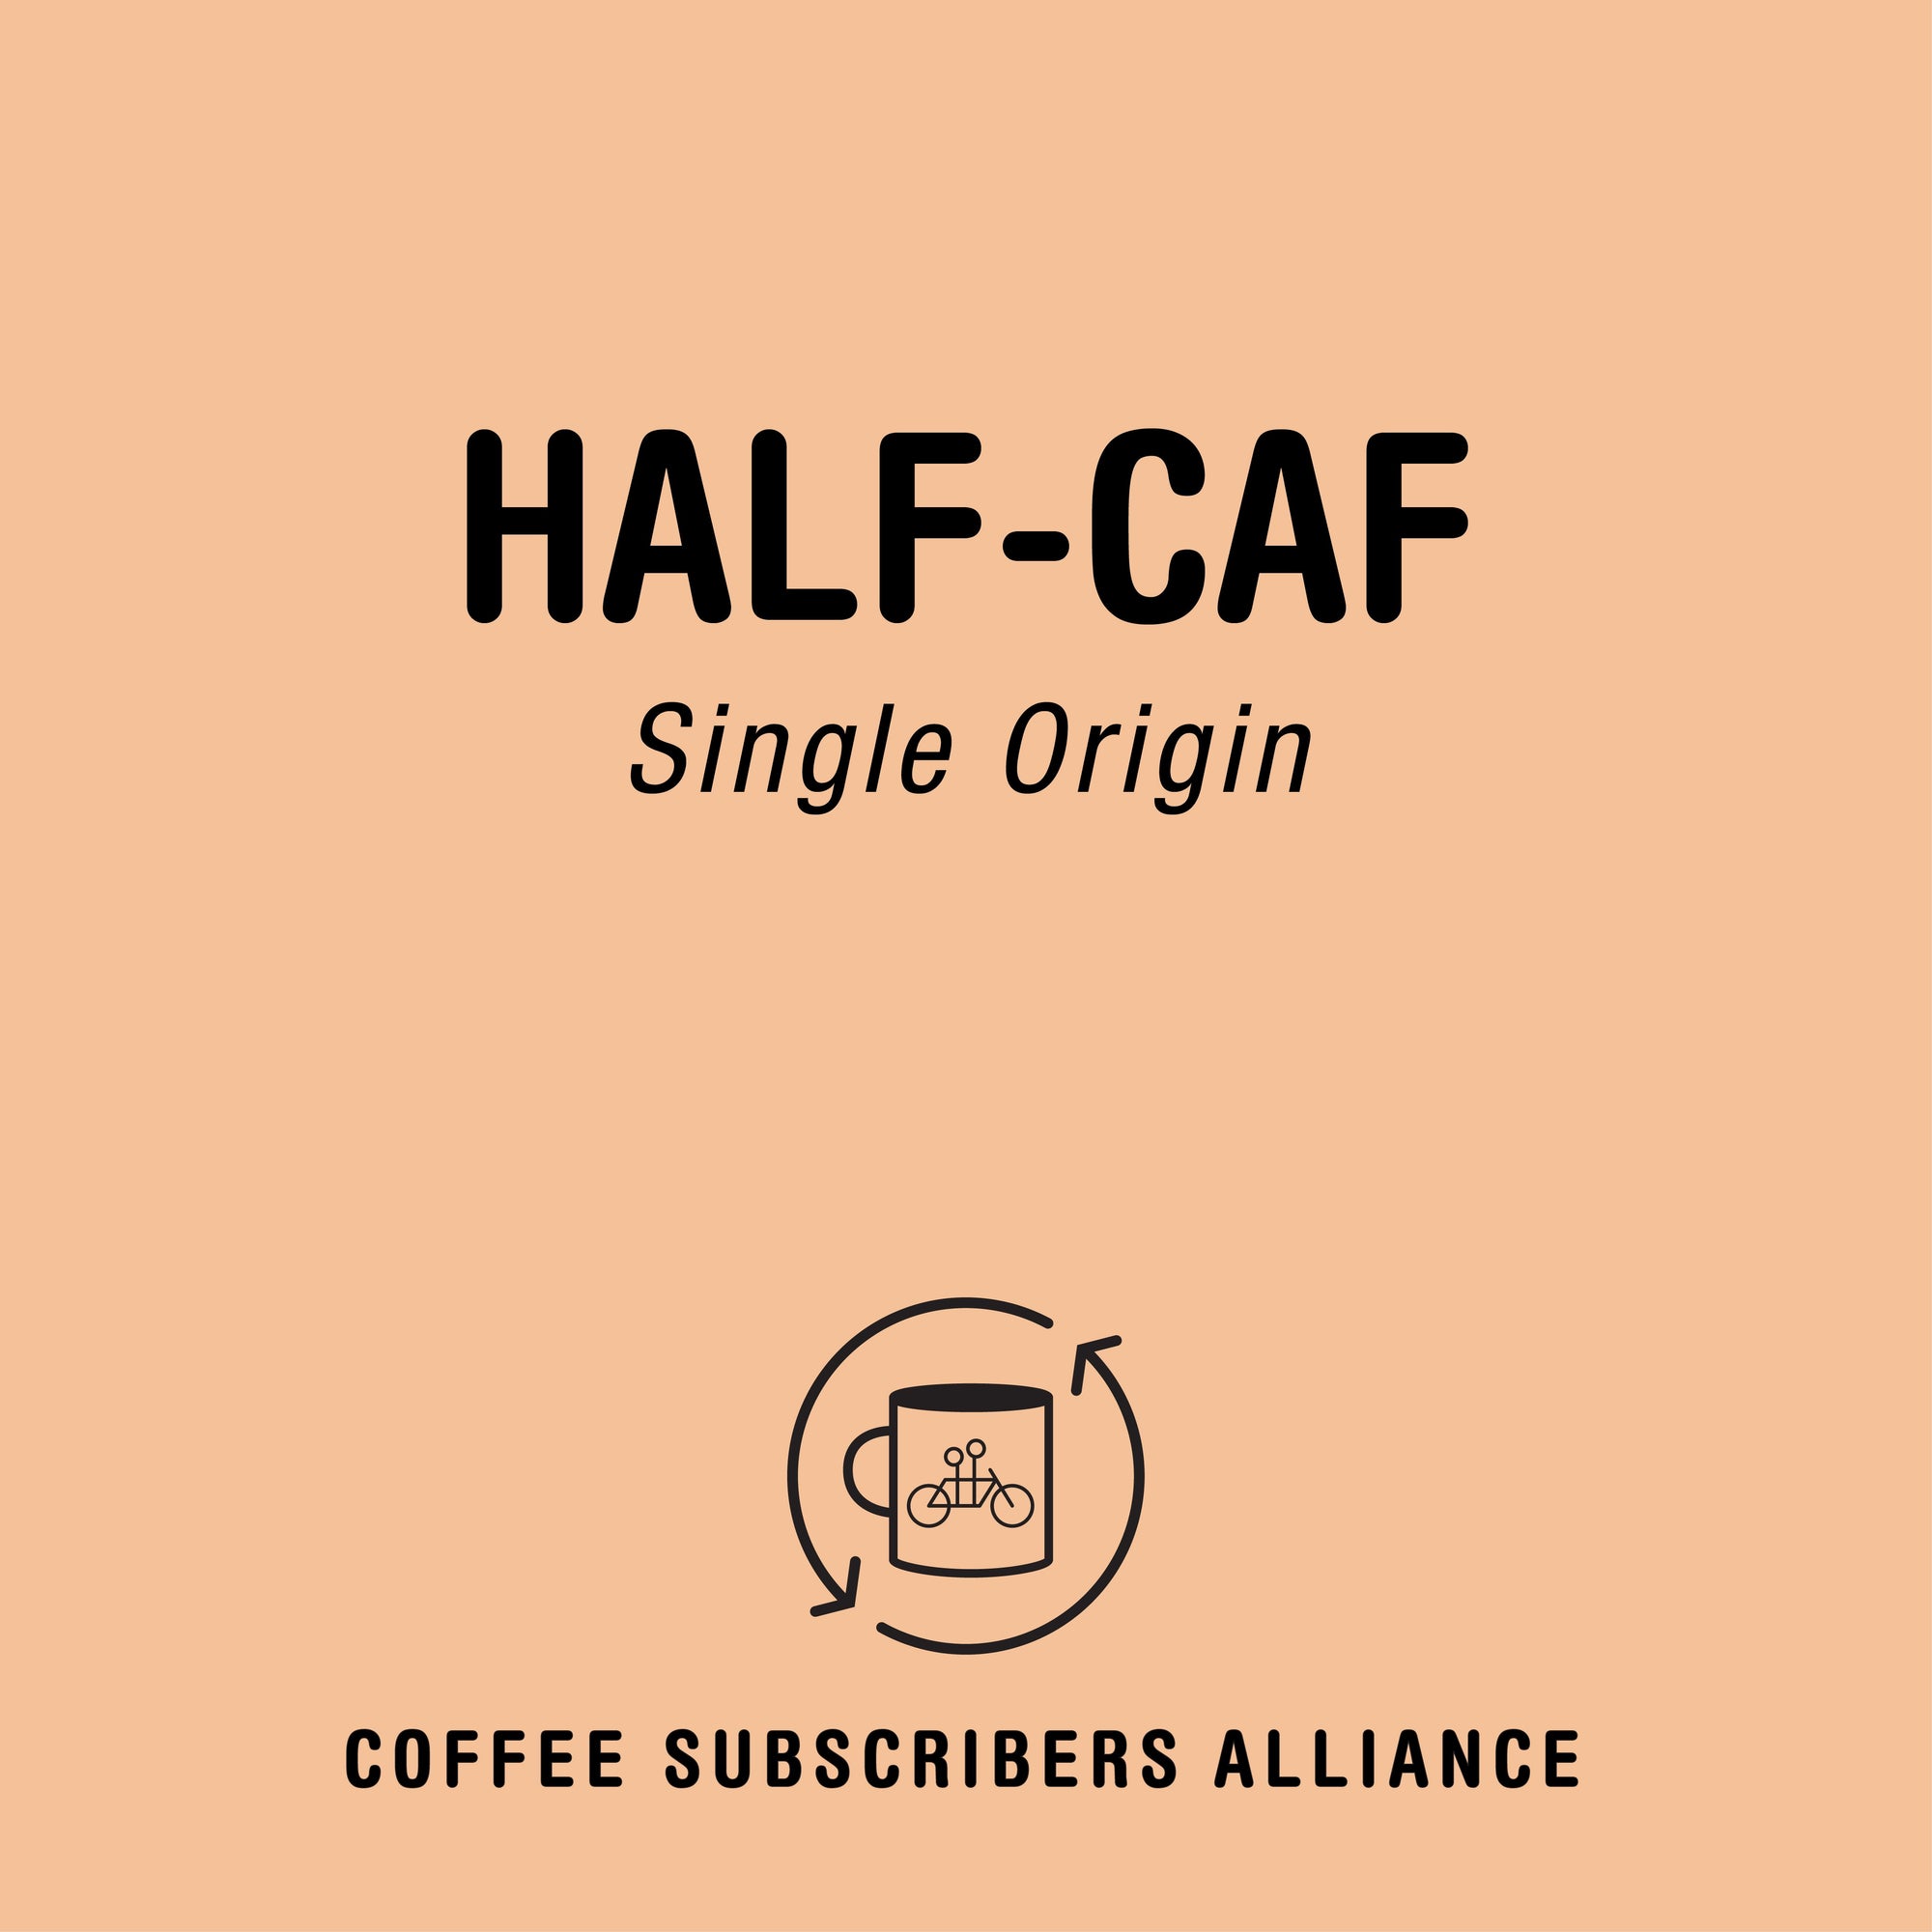 A minimalist graphic design featuring the text "Half-Caf Subscription Gift 2 Weeks x 12" at the top, with a circular logo below depicting a coffee cup and beans, labeled "Tandem Coffee Subscribers Alliance" on a peach background.